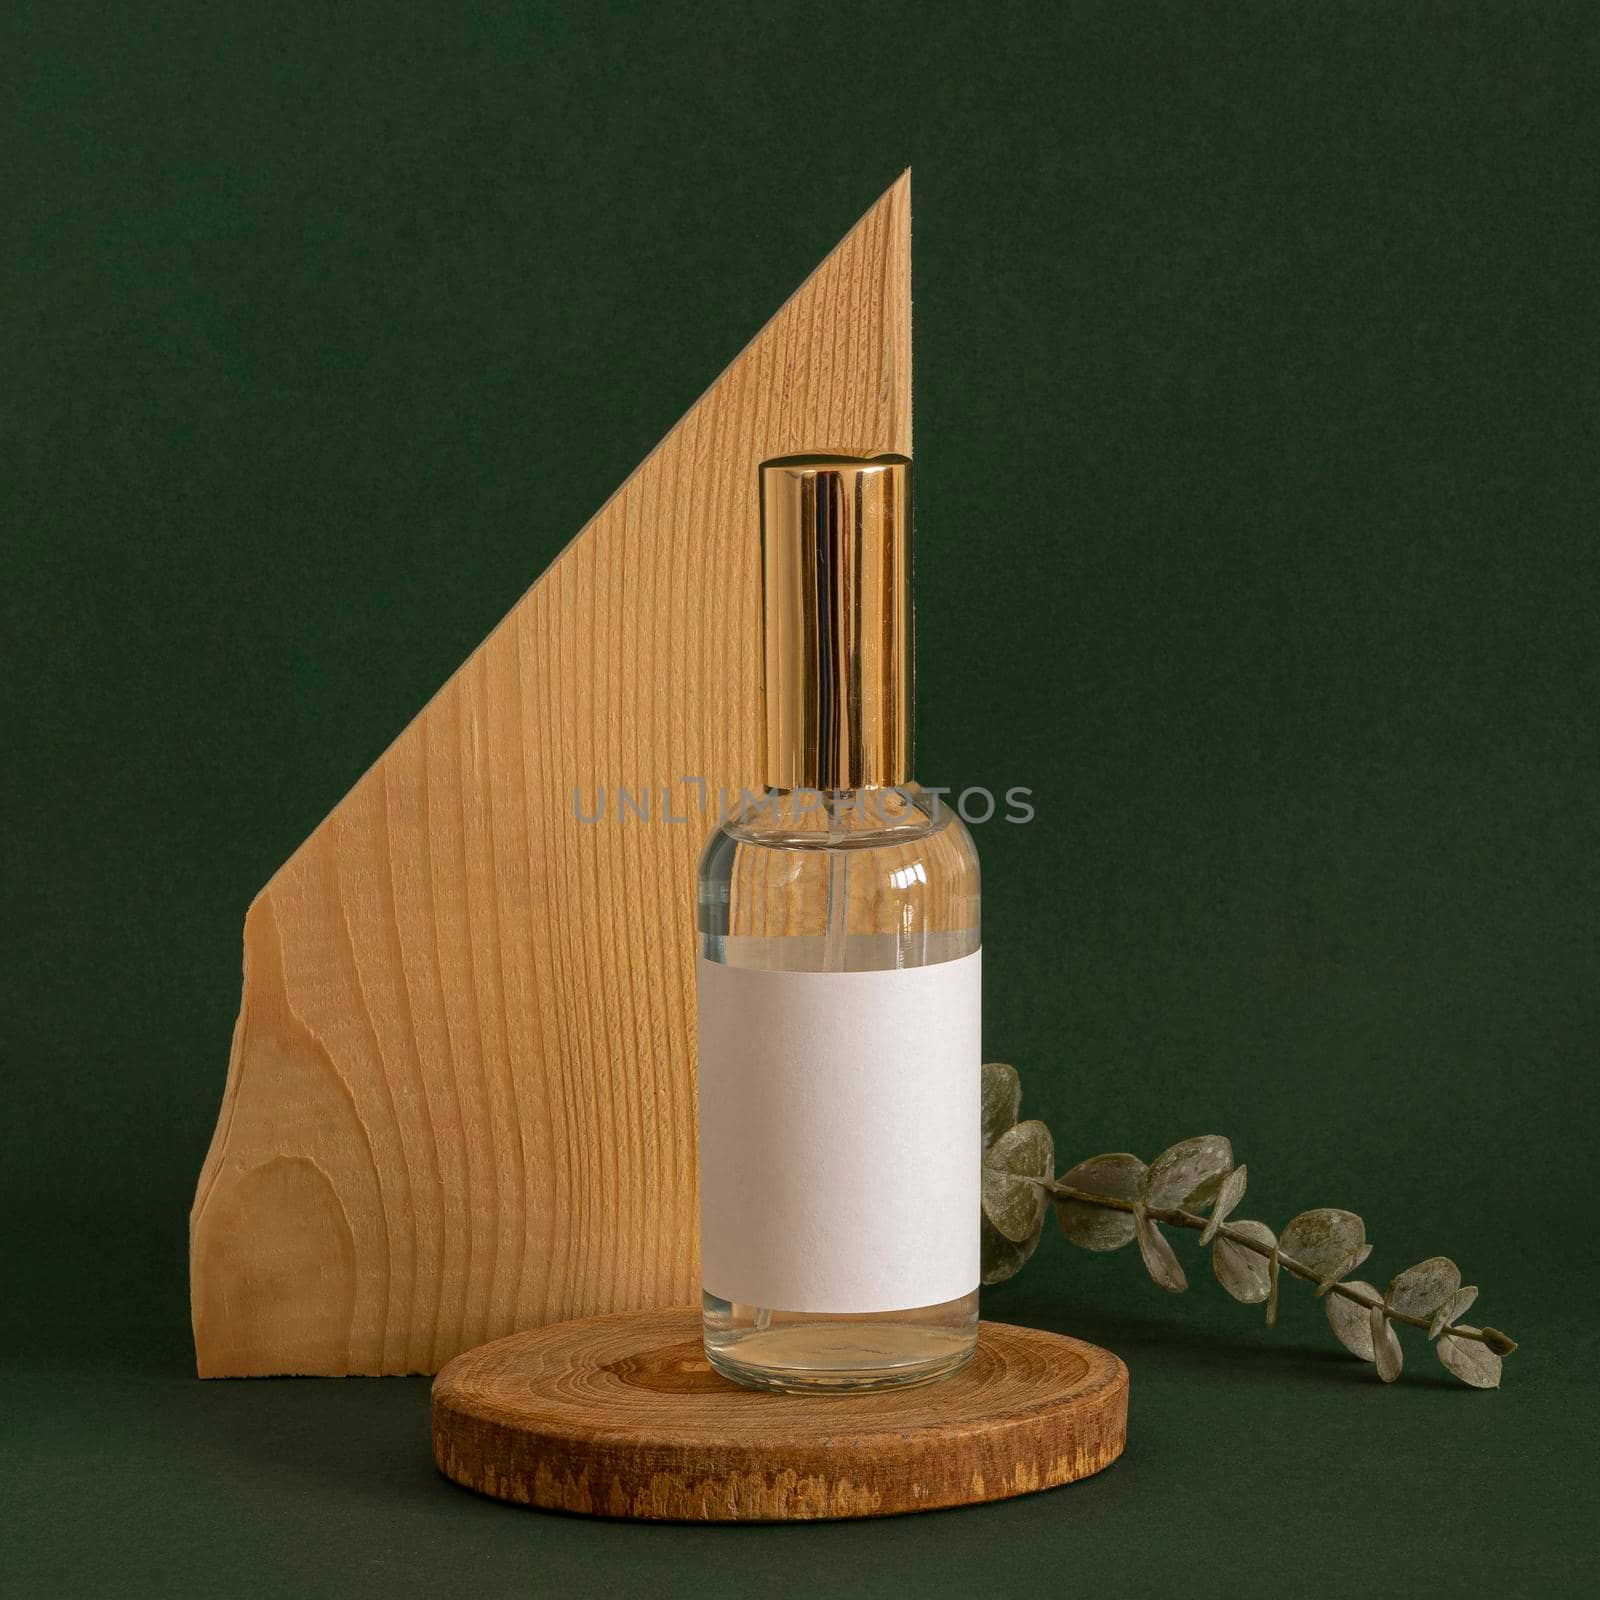 front view skin care product wooden decorative piece